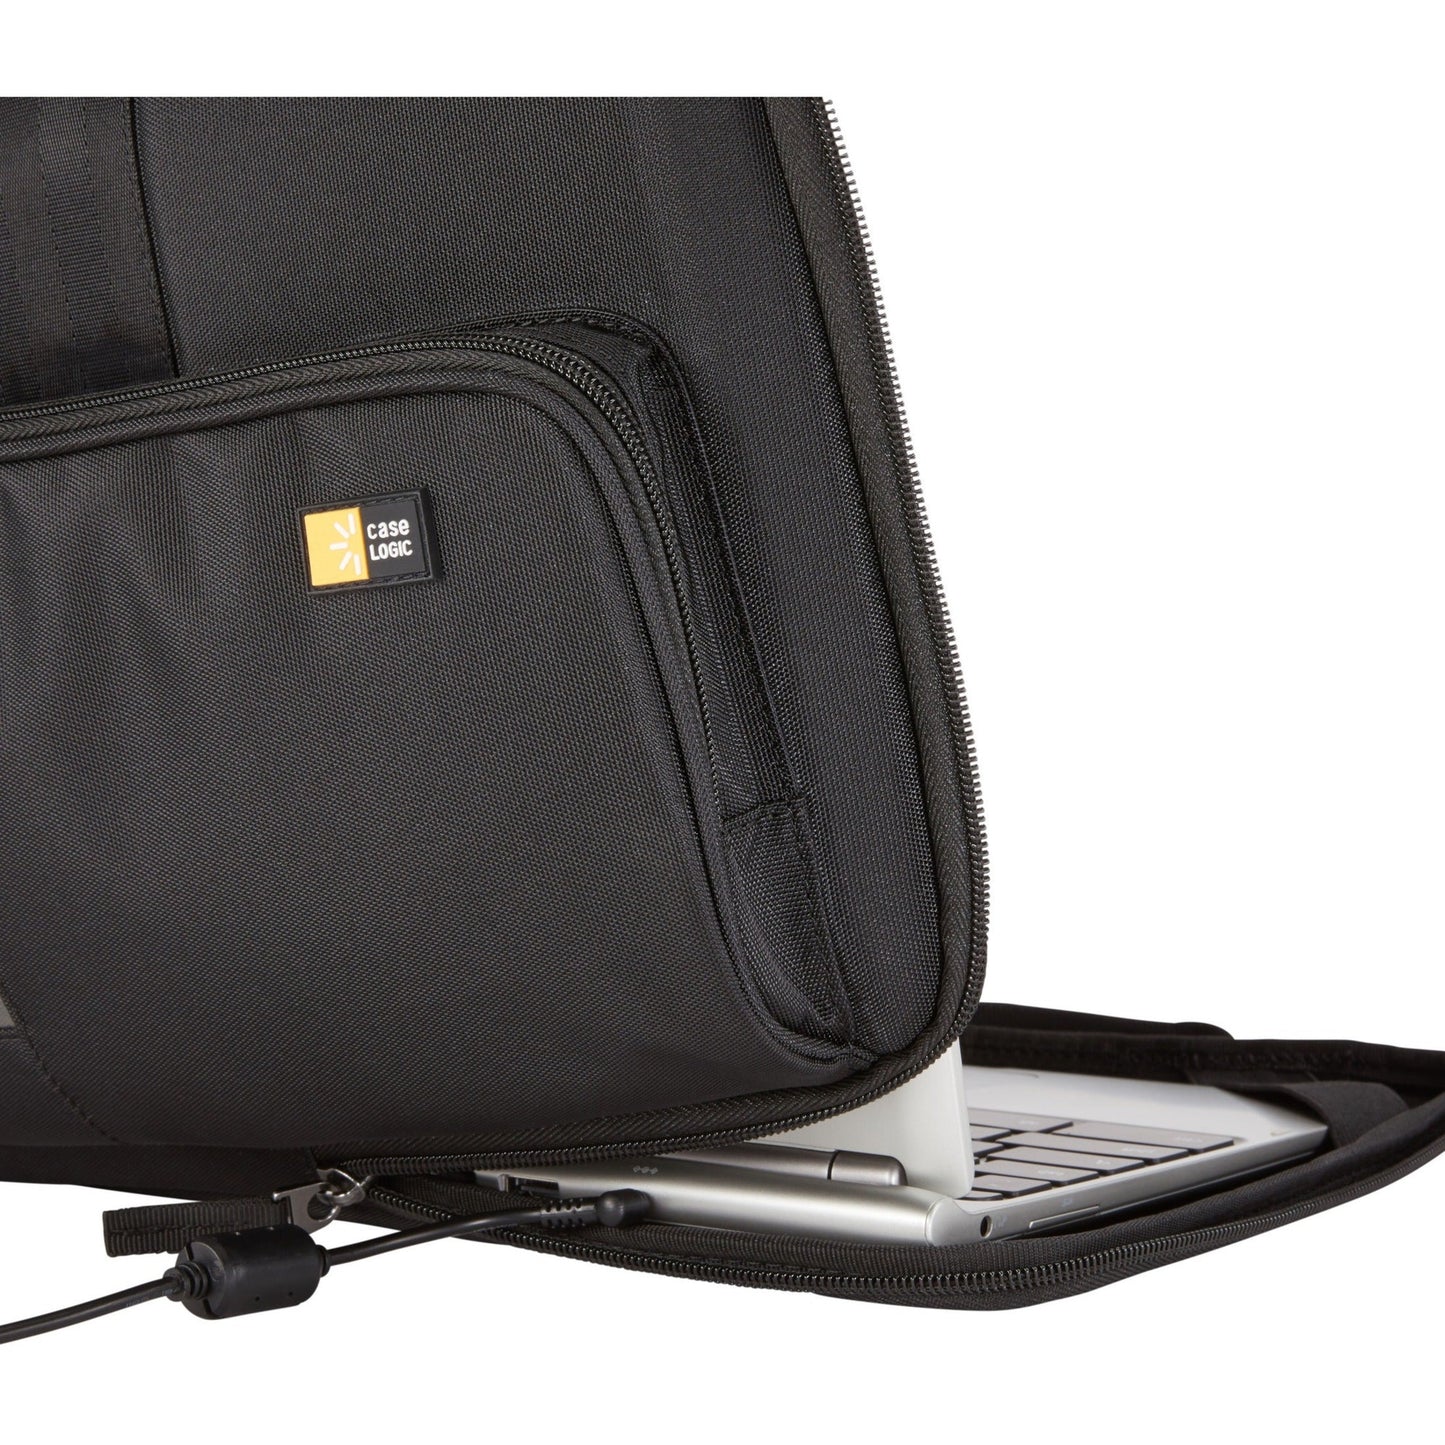 Case Logic QNS-311 Carrying Case (Attach&eacute;) for 13.3" Notebook Accessories - Black